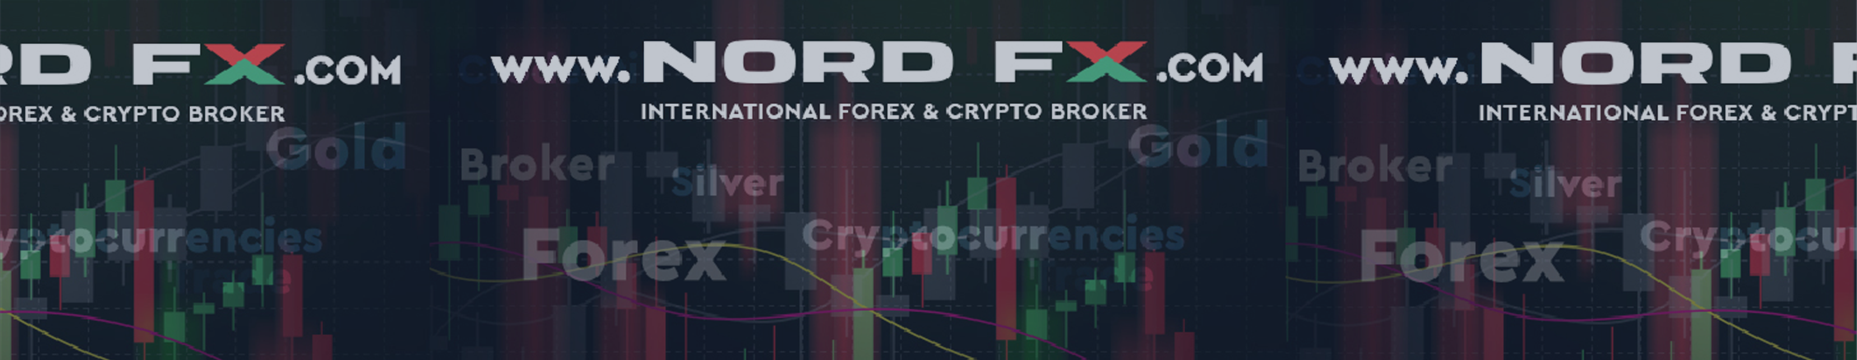 Forex Forecast and Cryptocurrencies Forecast for March 15-19, 2021